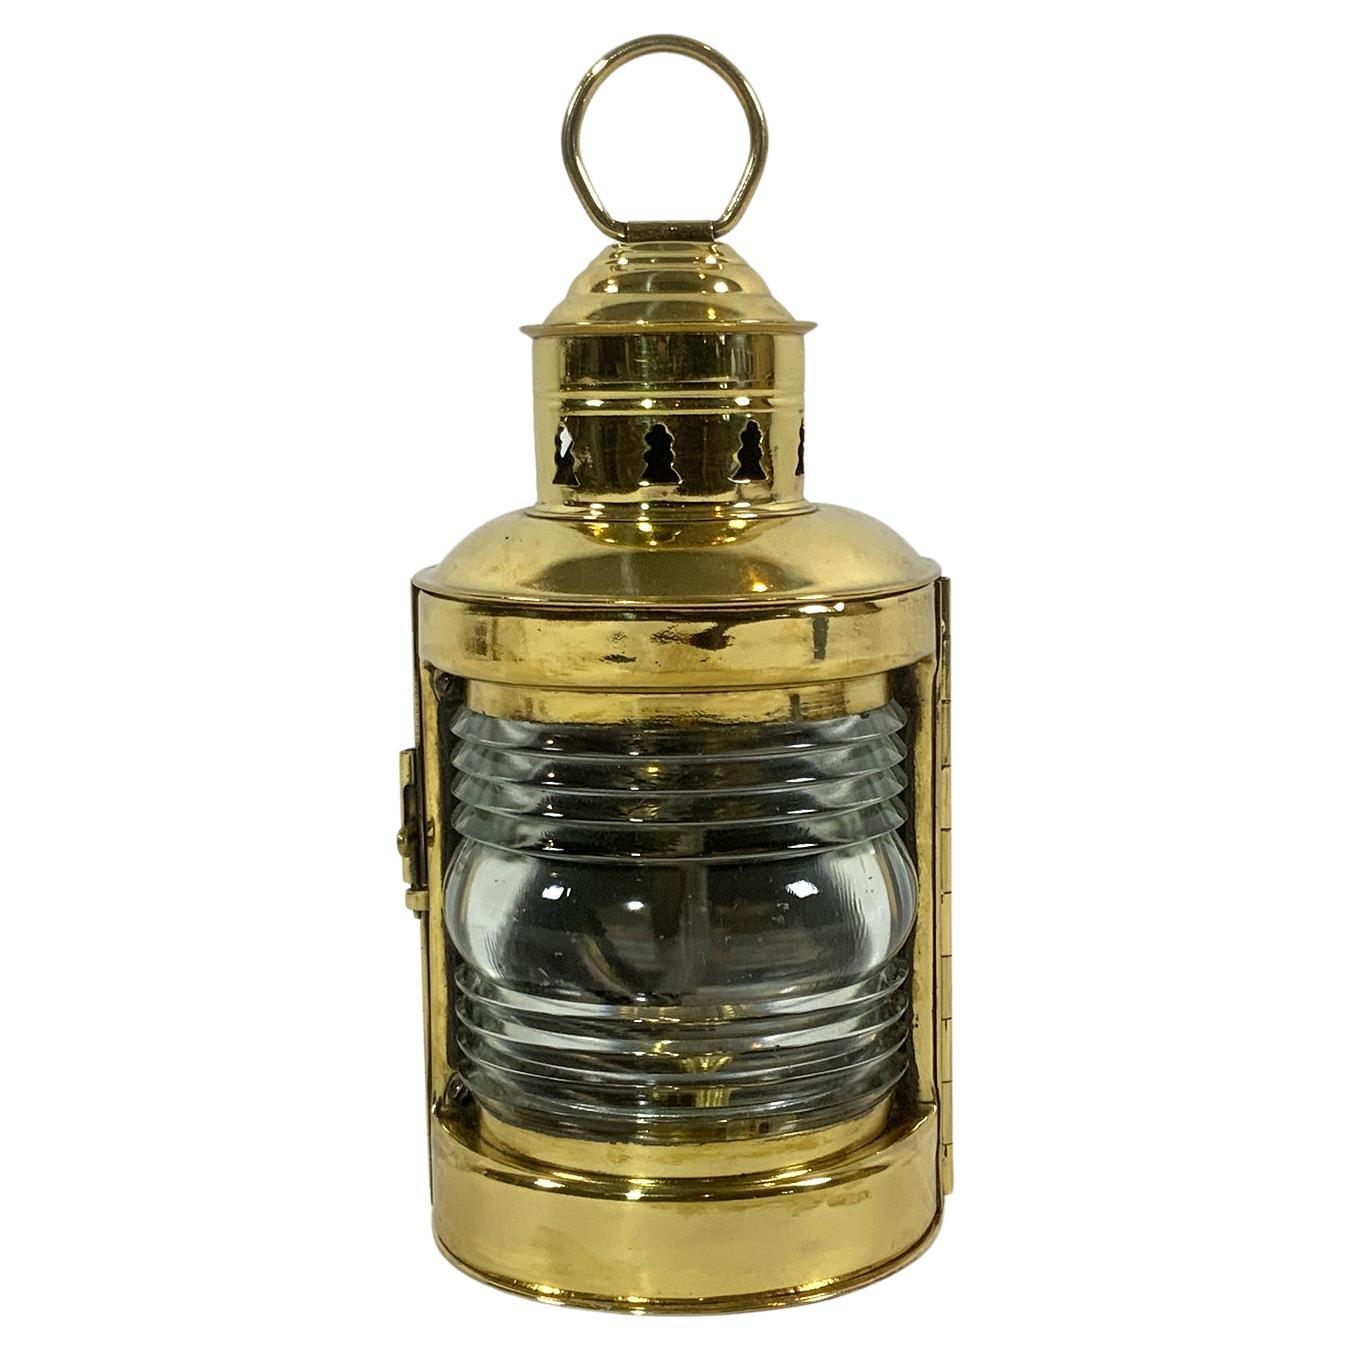 Brass Masthead Boat Lantern by "Wilcox Crittenden" of Middletown Connecticut For Sale